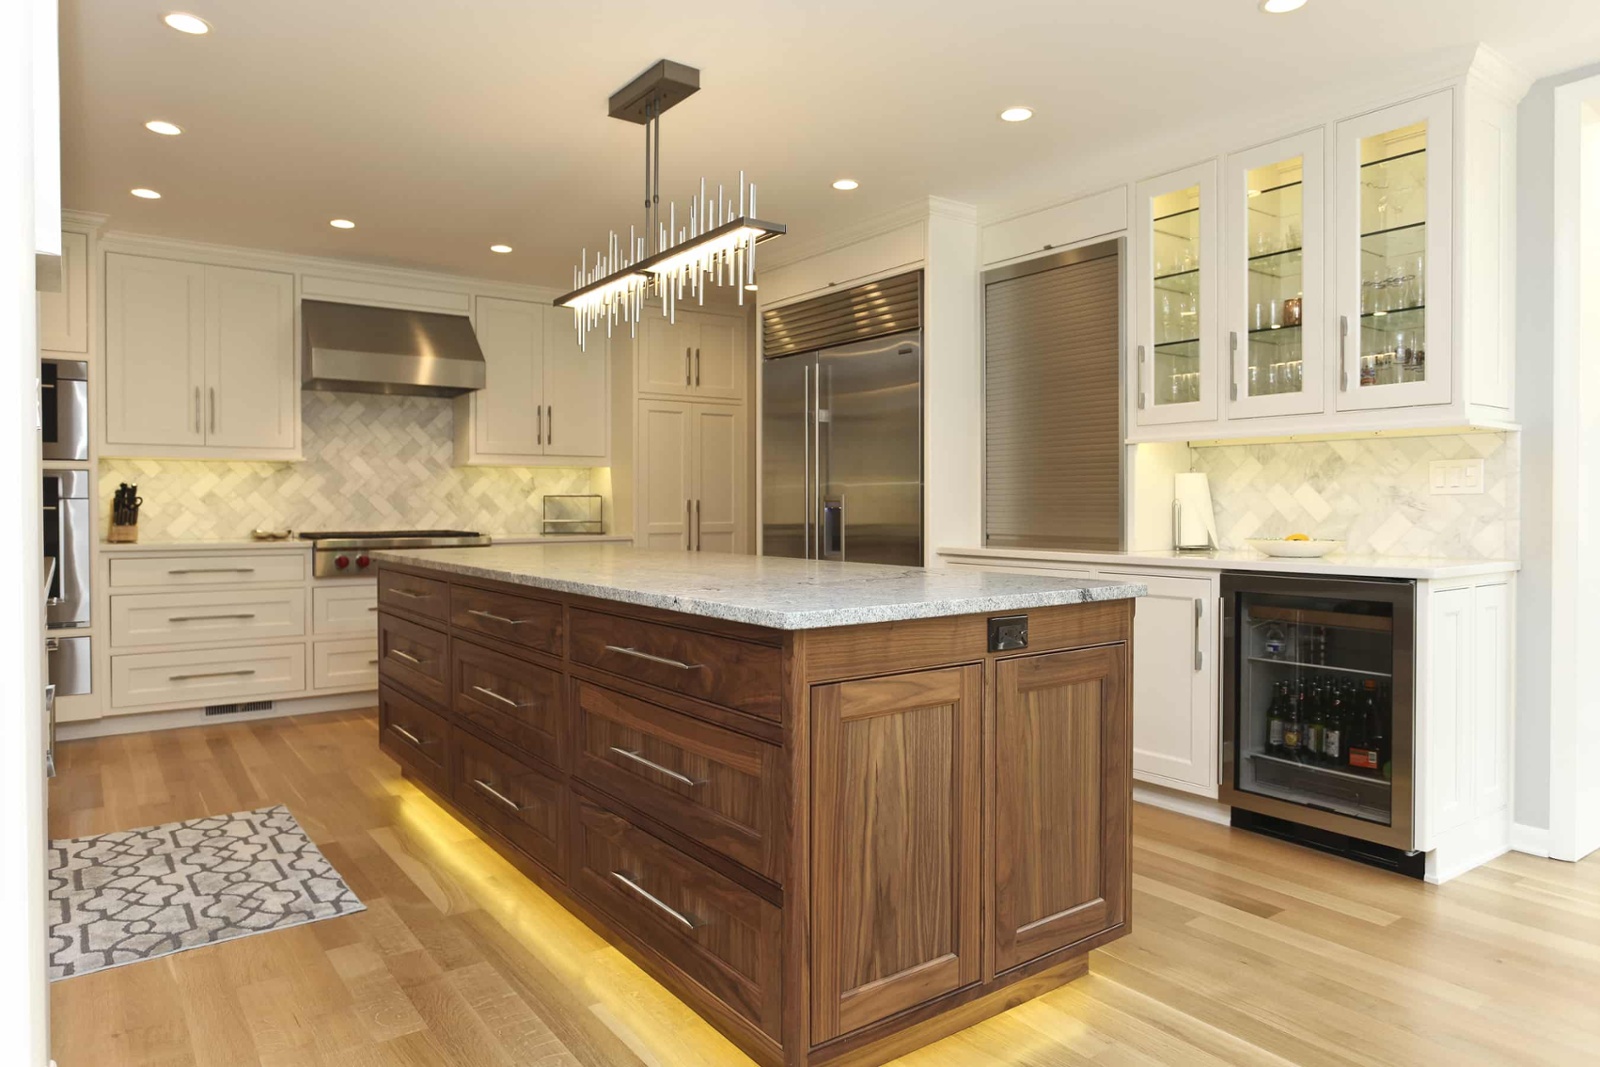 oak cabinets in kitchen with under cabinet lighting and marble kitchen island-1